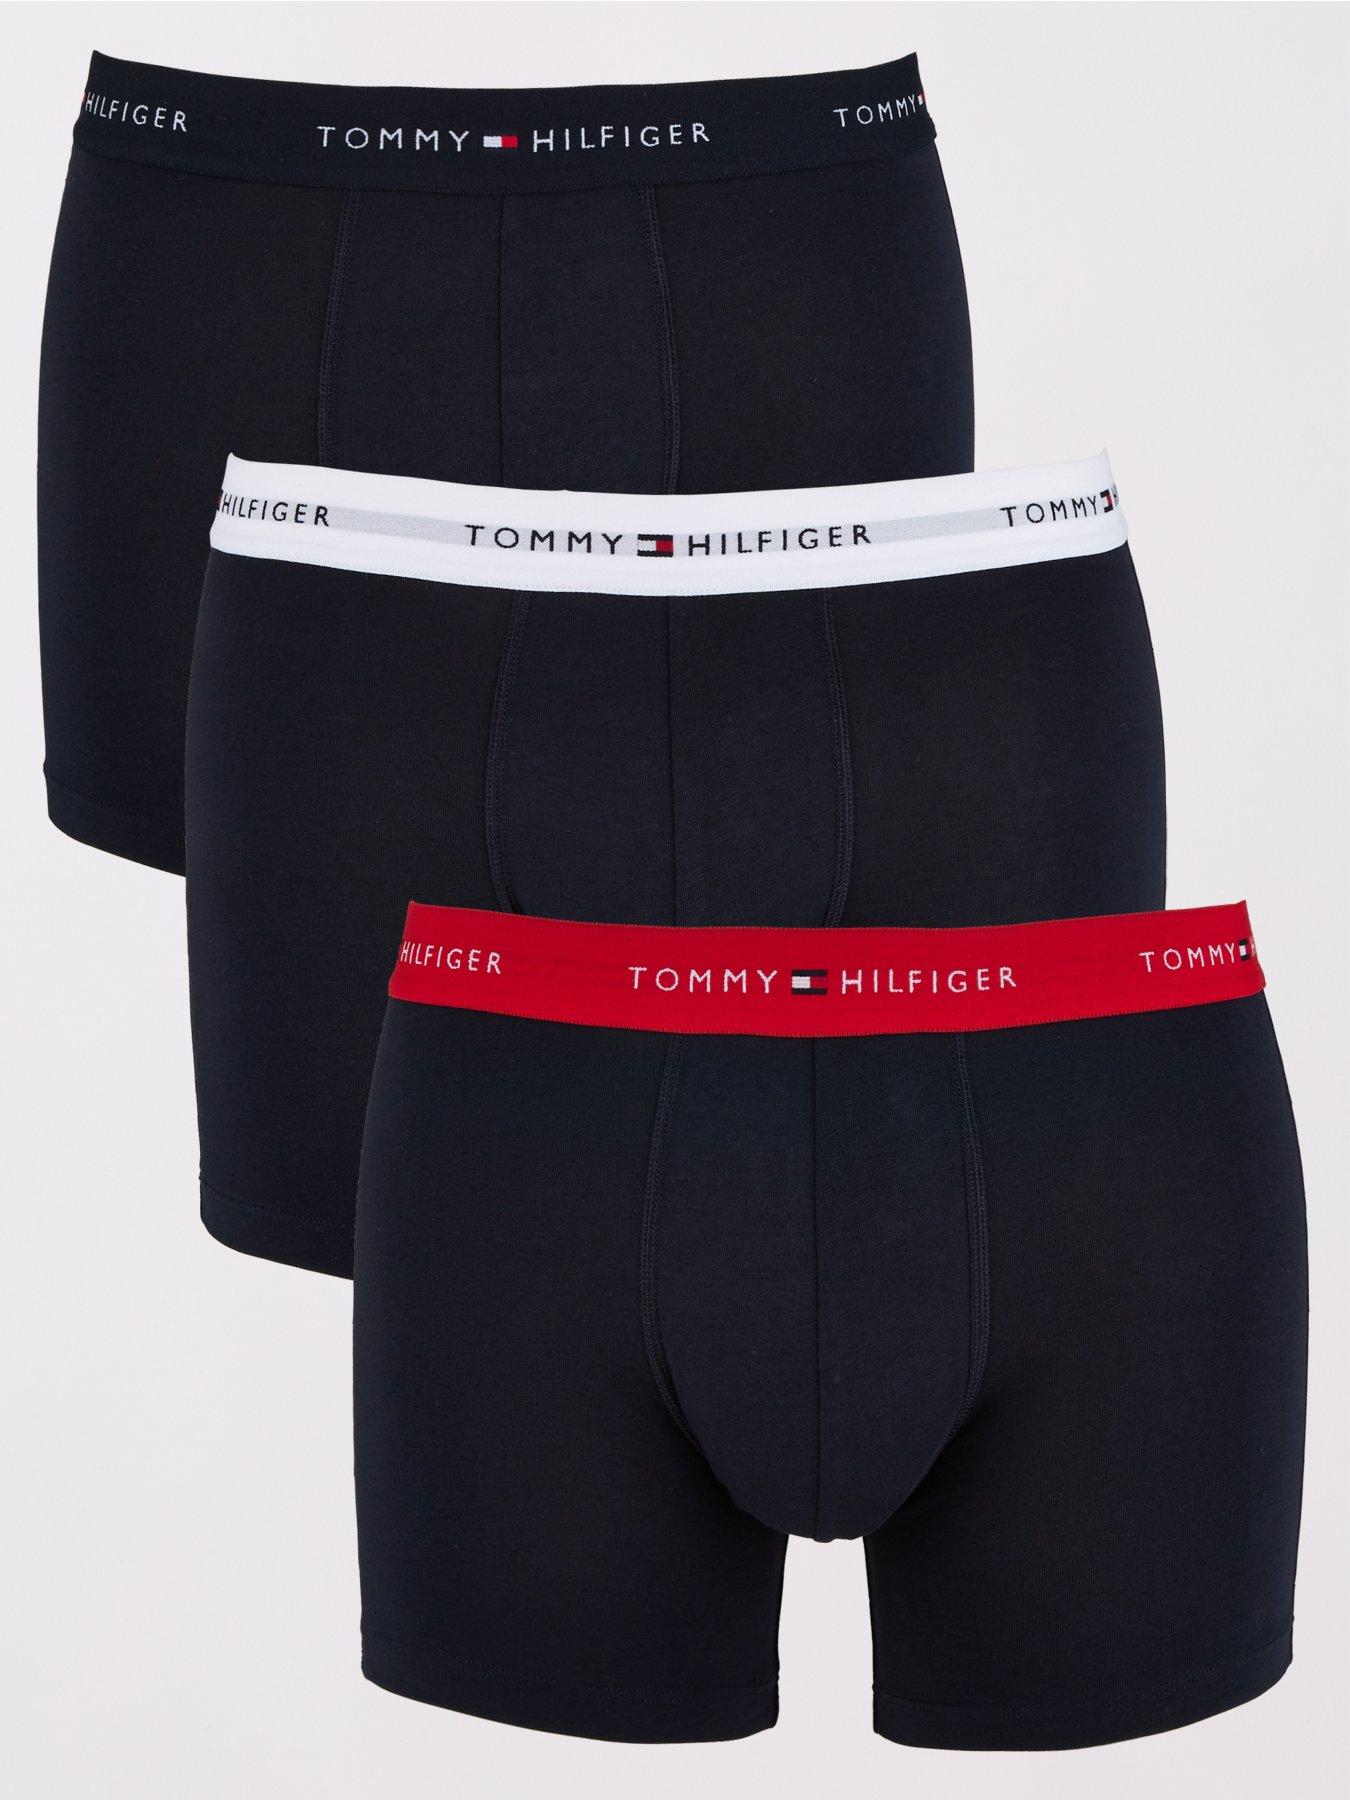 $53 Tommy Hilfiger Underwear Men Red Gray Fit Cotton Stretch Boxers 2 Pack  L